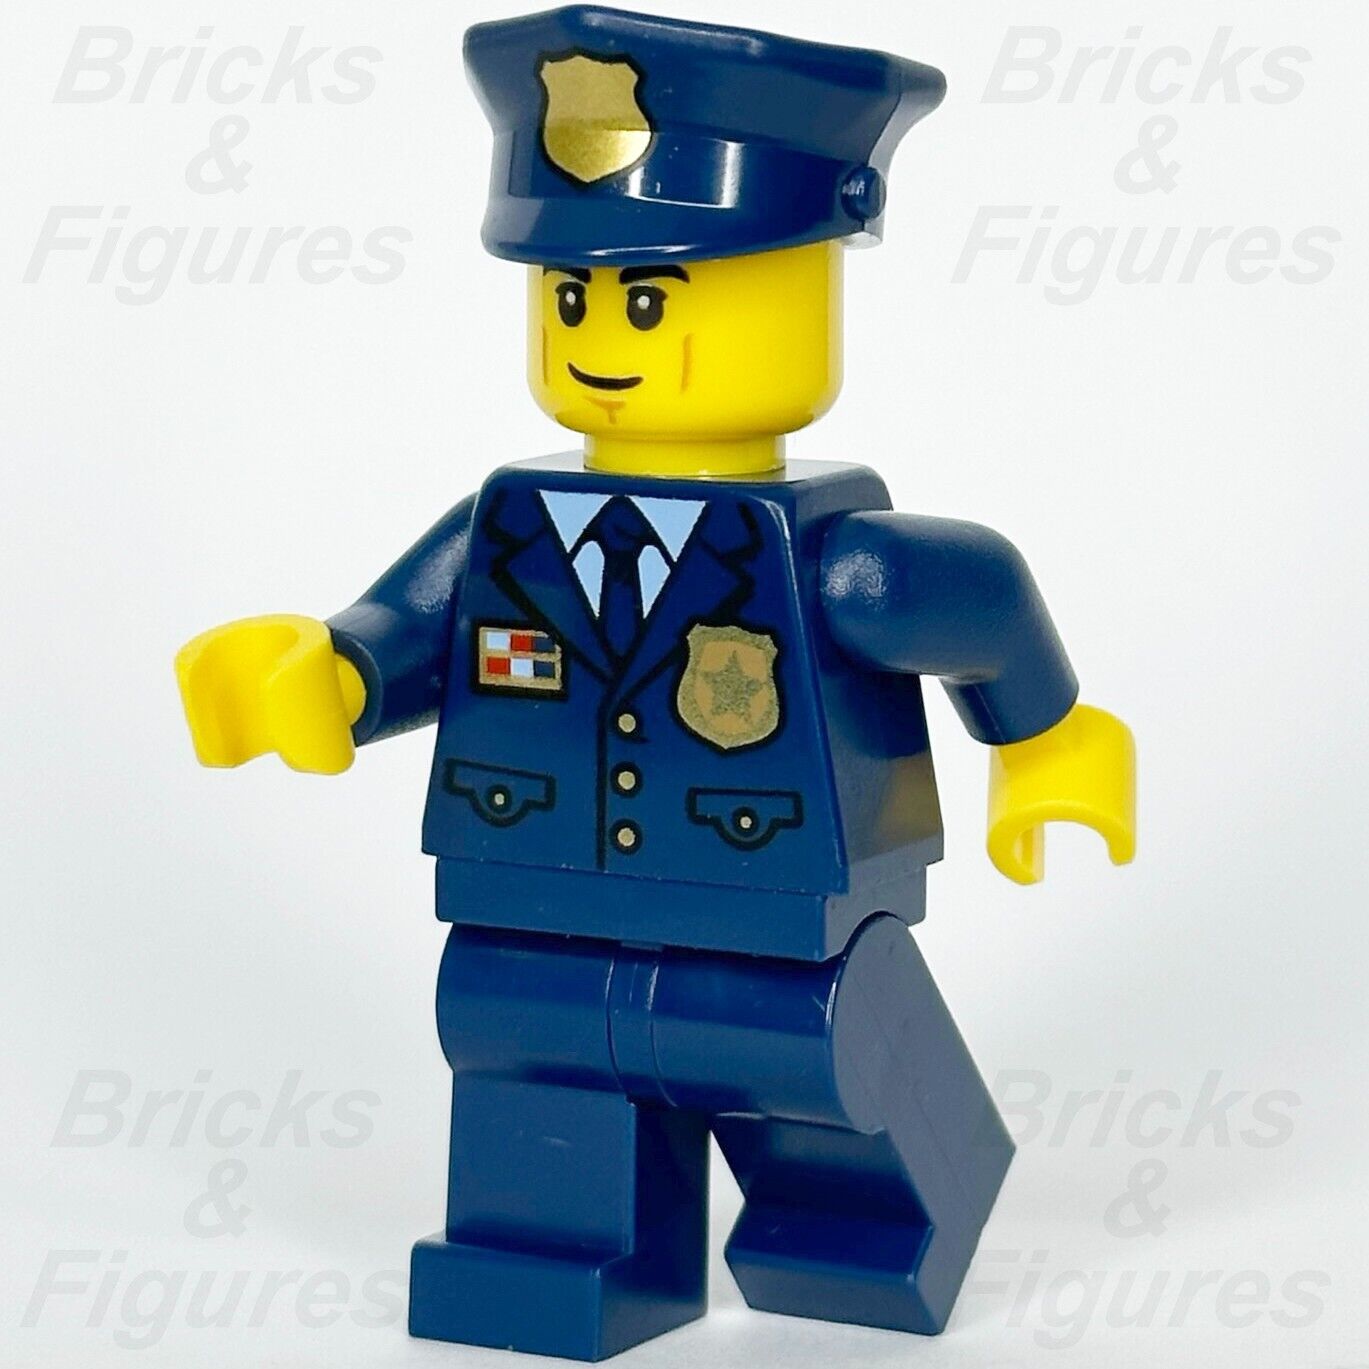 LEGO Creator Expert 'POLICE OFFICERS' minifigures - (10278)